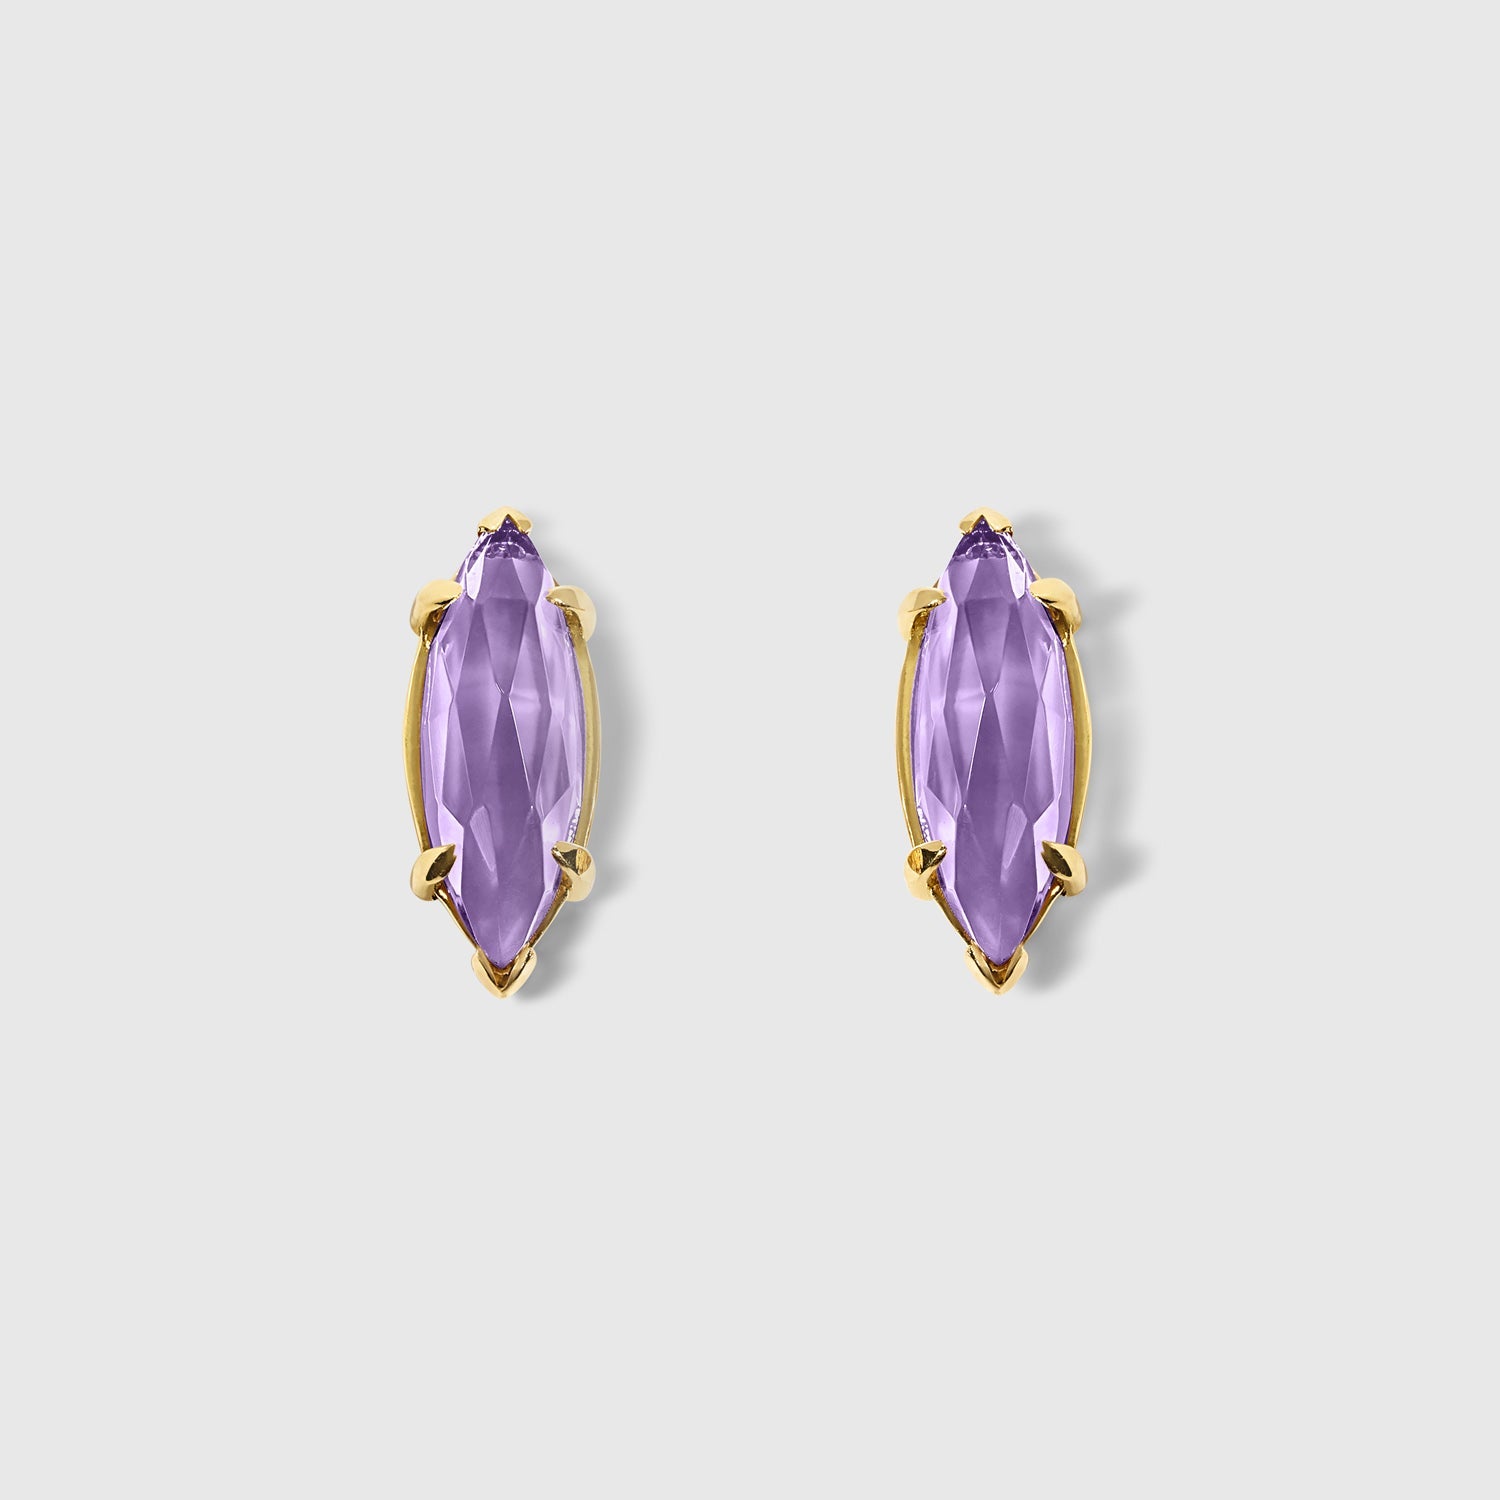 Amethyst Marquise Stud Earrings in Solid Gold – Midnight Shine Set - Aurora Laffite Jewelry